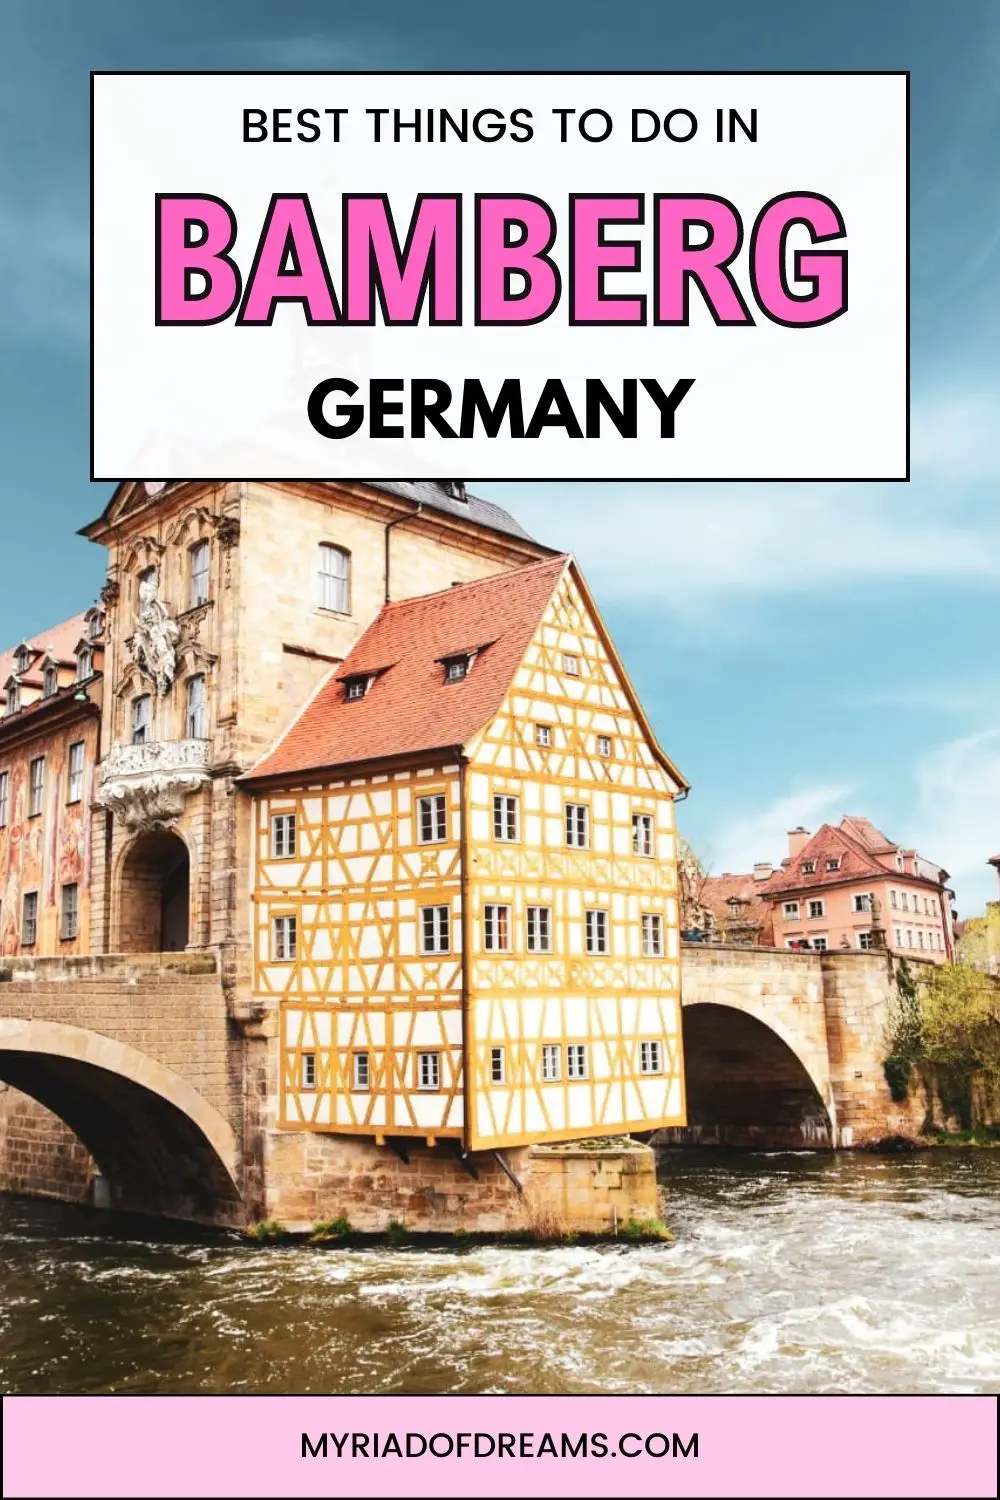 Best things to do in Bamberg, Germany on a day trip from Nuremberg.